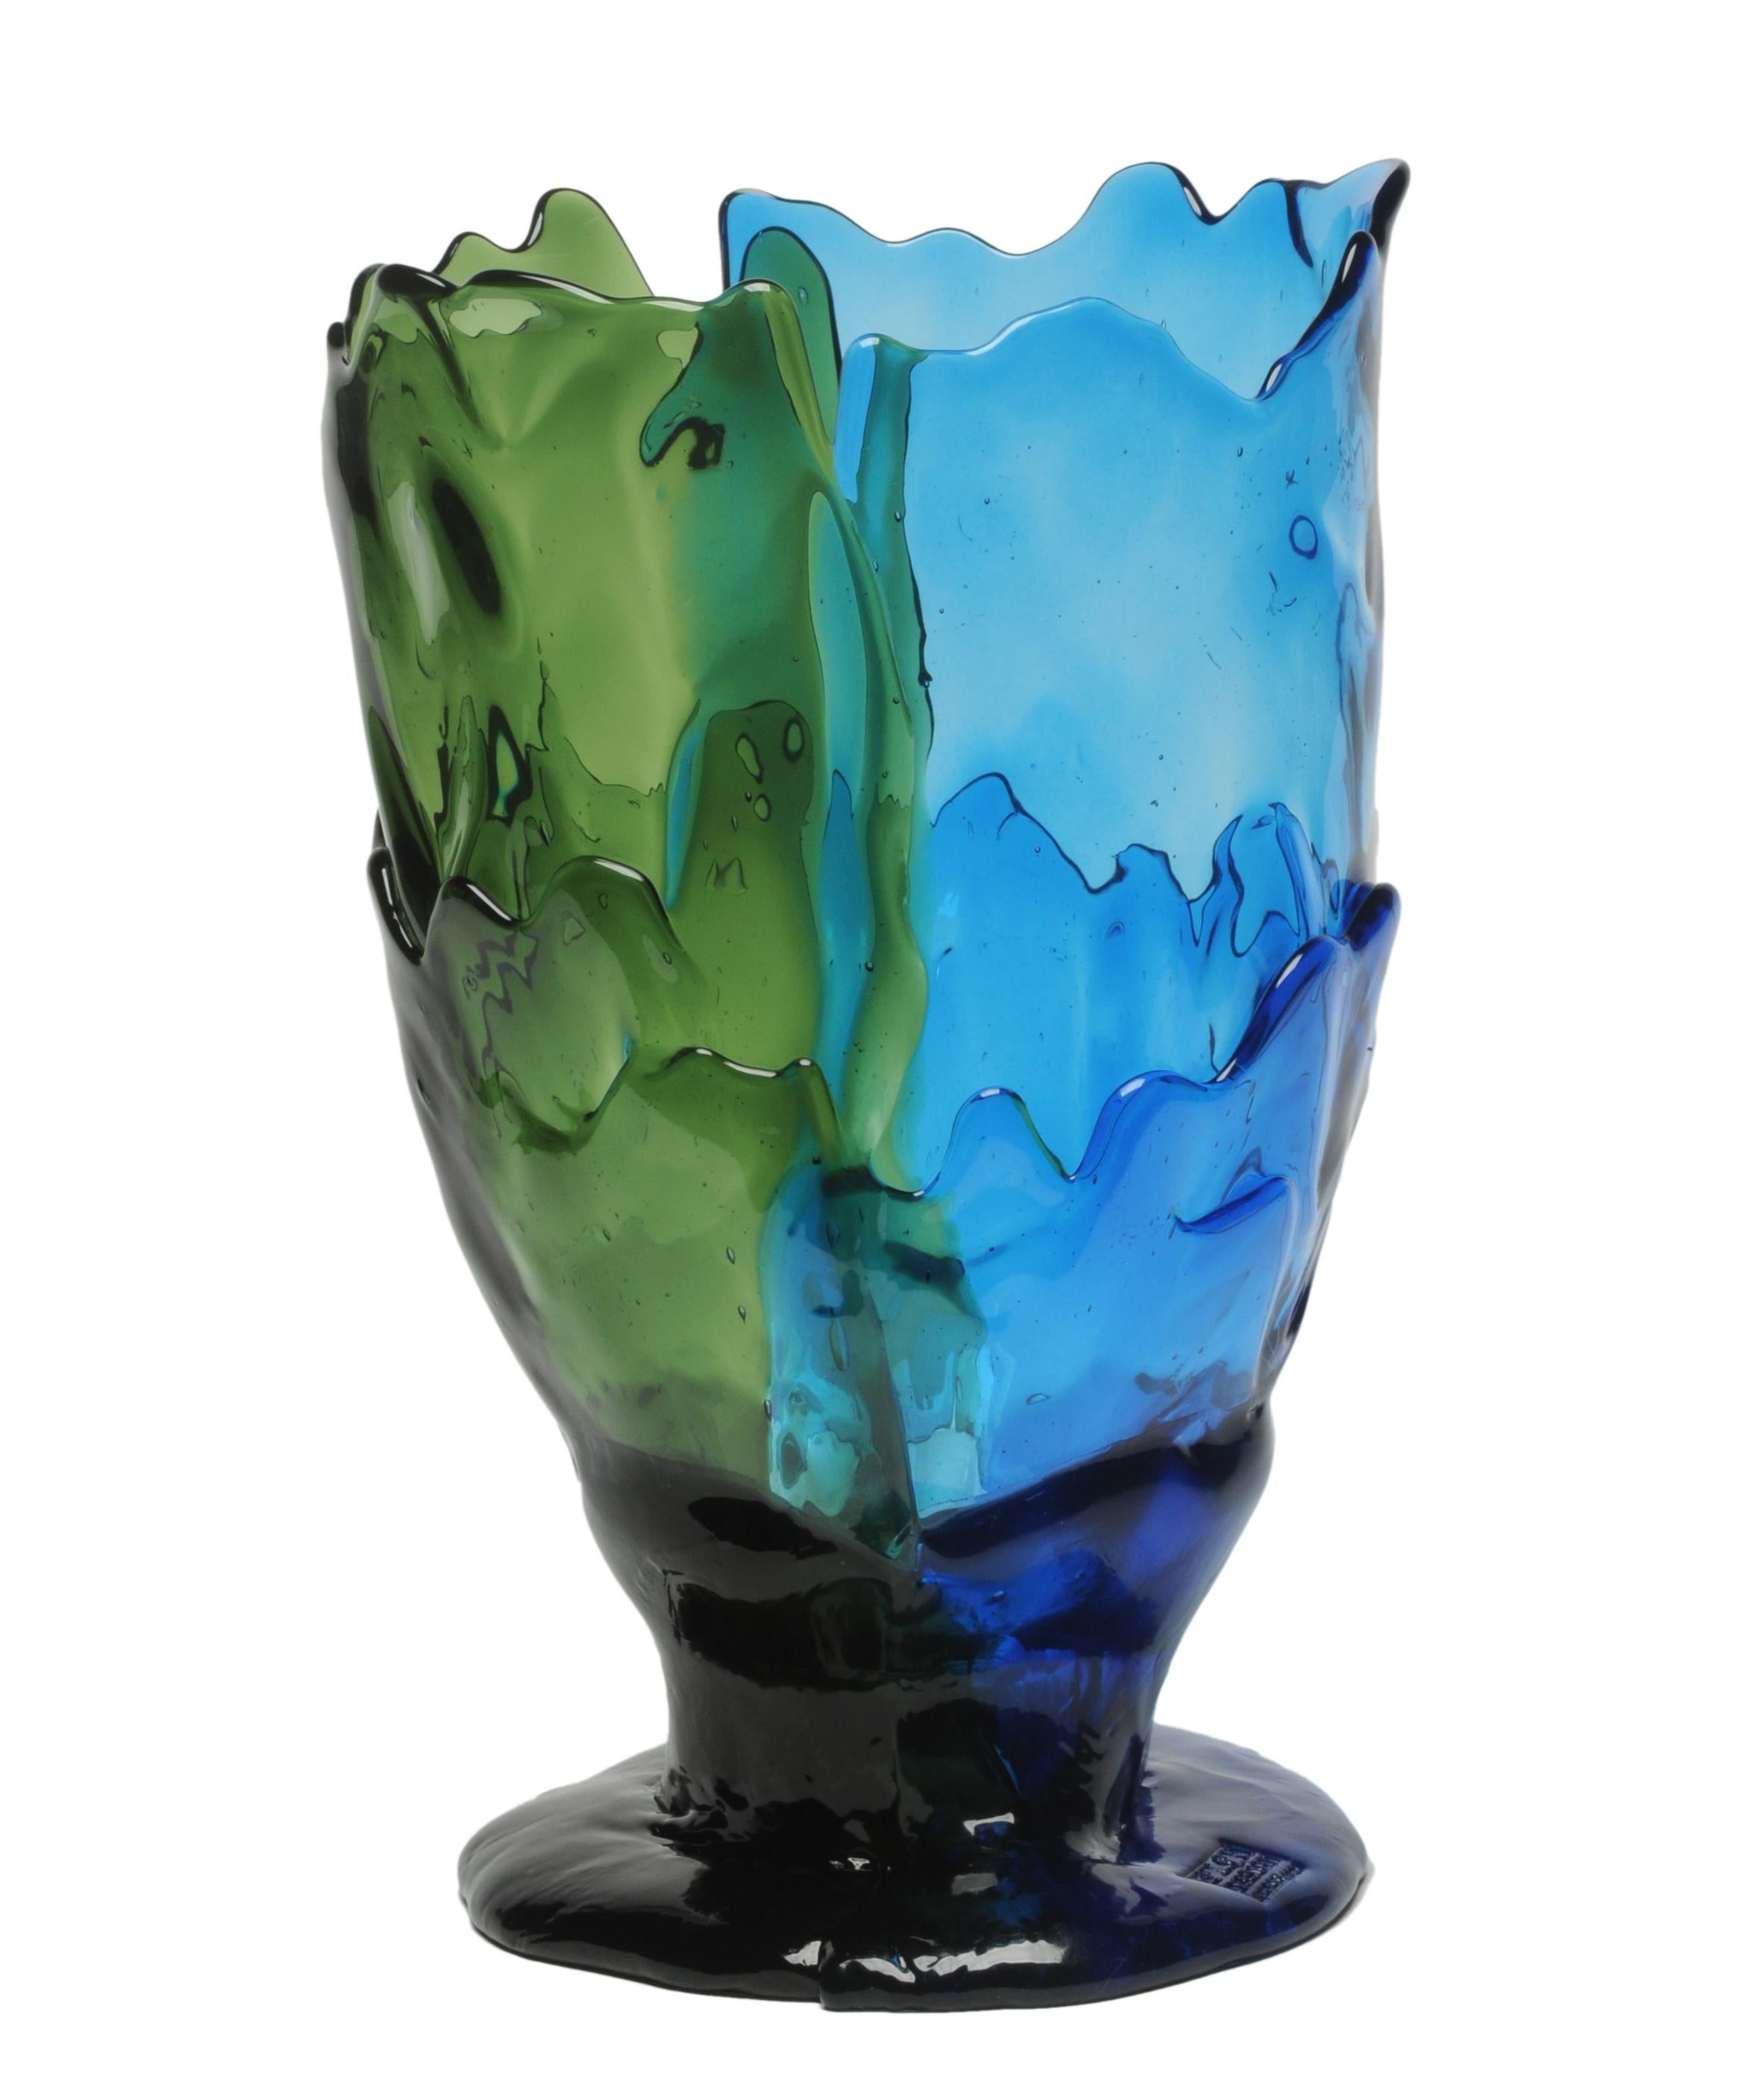 Twin-C vase, clear green and blue.

Vase in soft resin designed by Gaetano Pesce in 1995 for Fish Design collection.

Measures: M ø 16cm x H 26cm

Other sizes available.

Colours: clear green and blue.

Vase in soft resin designed by